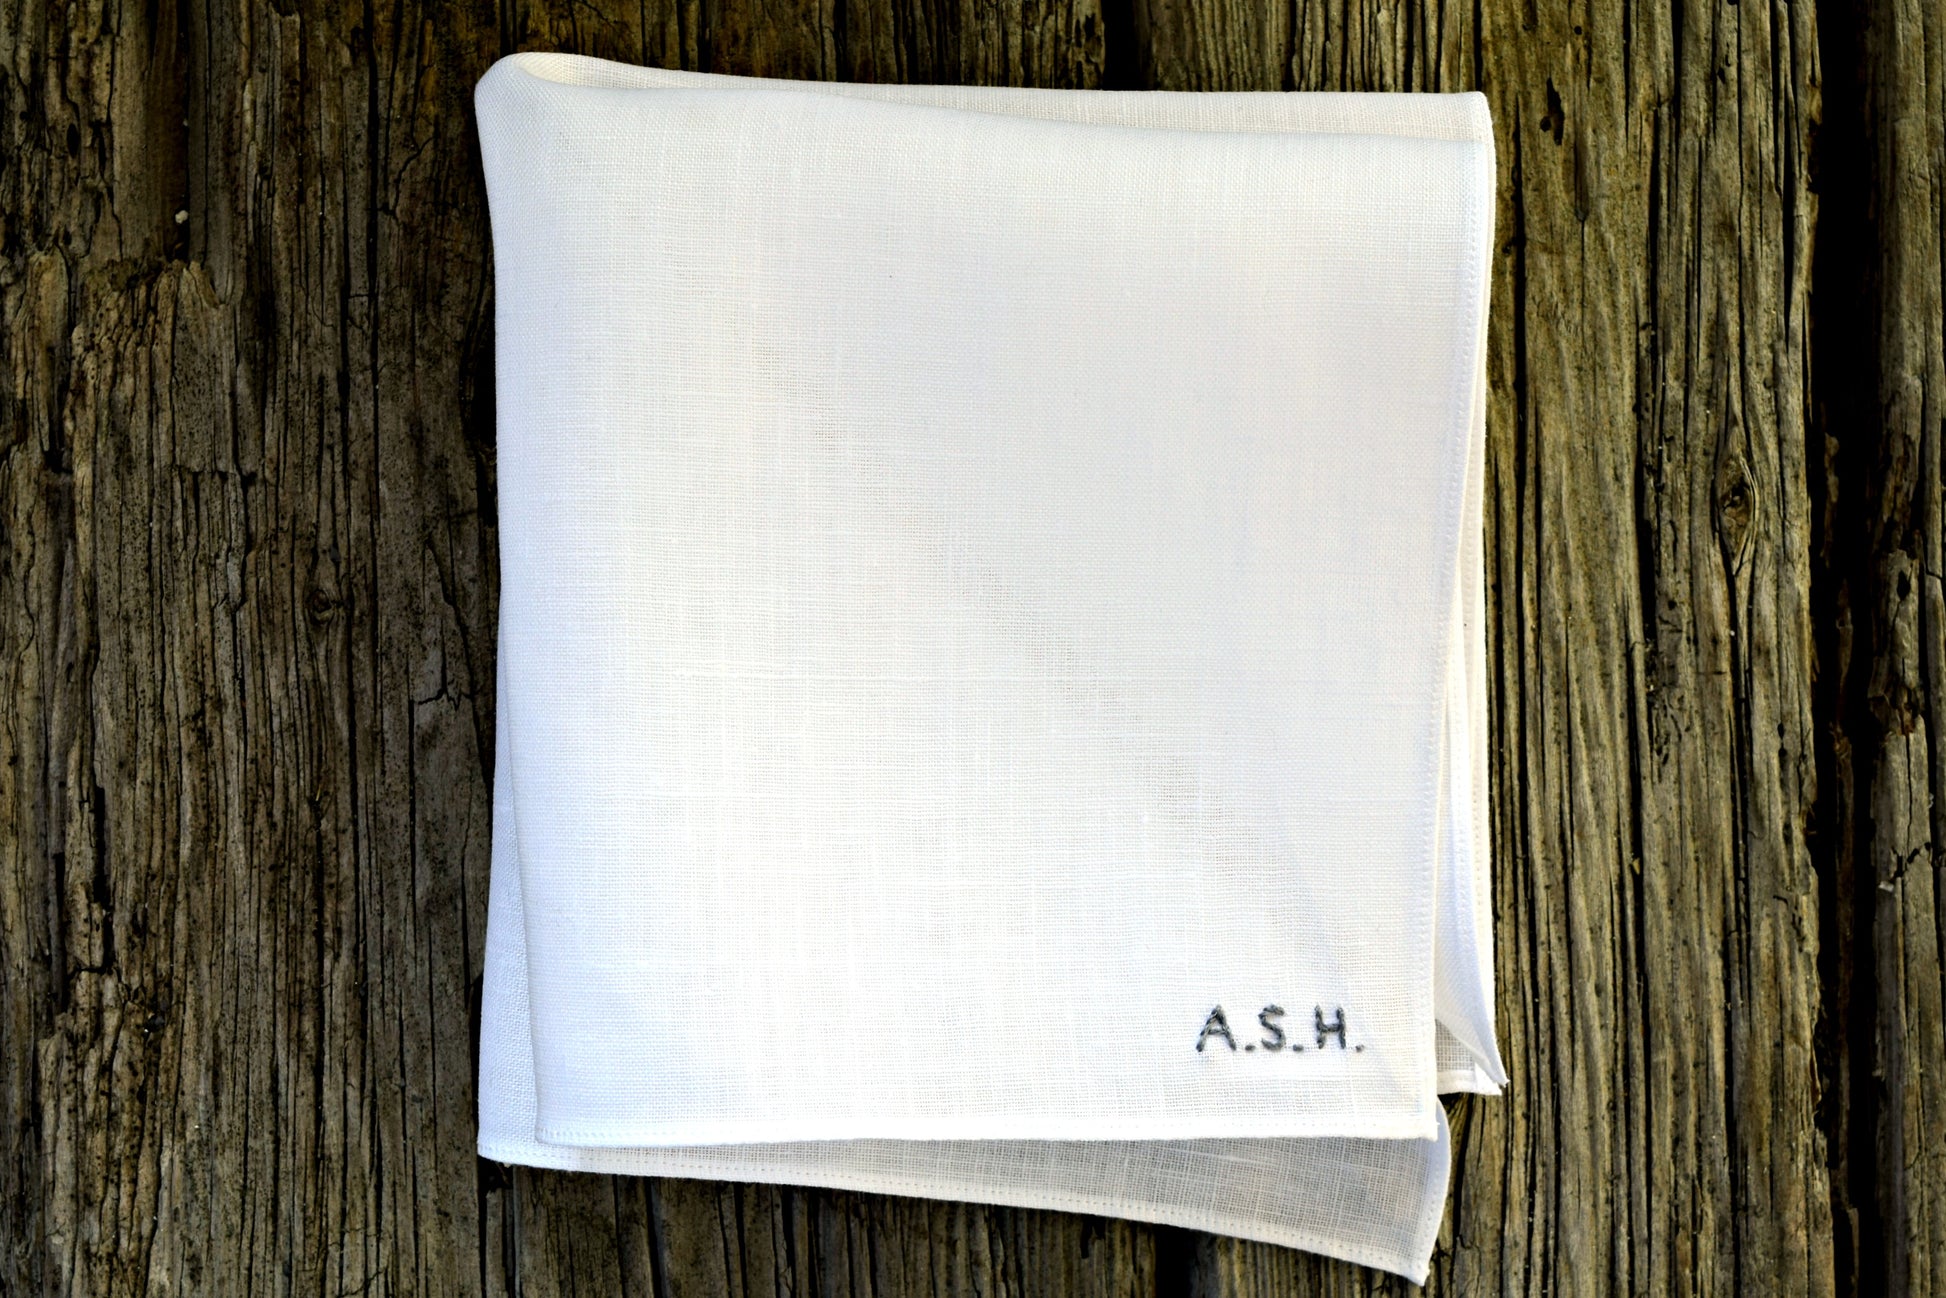 White linen handkerchief personalized with tiny block letter initials